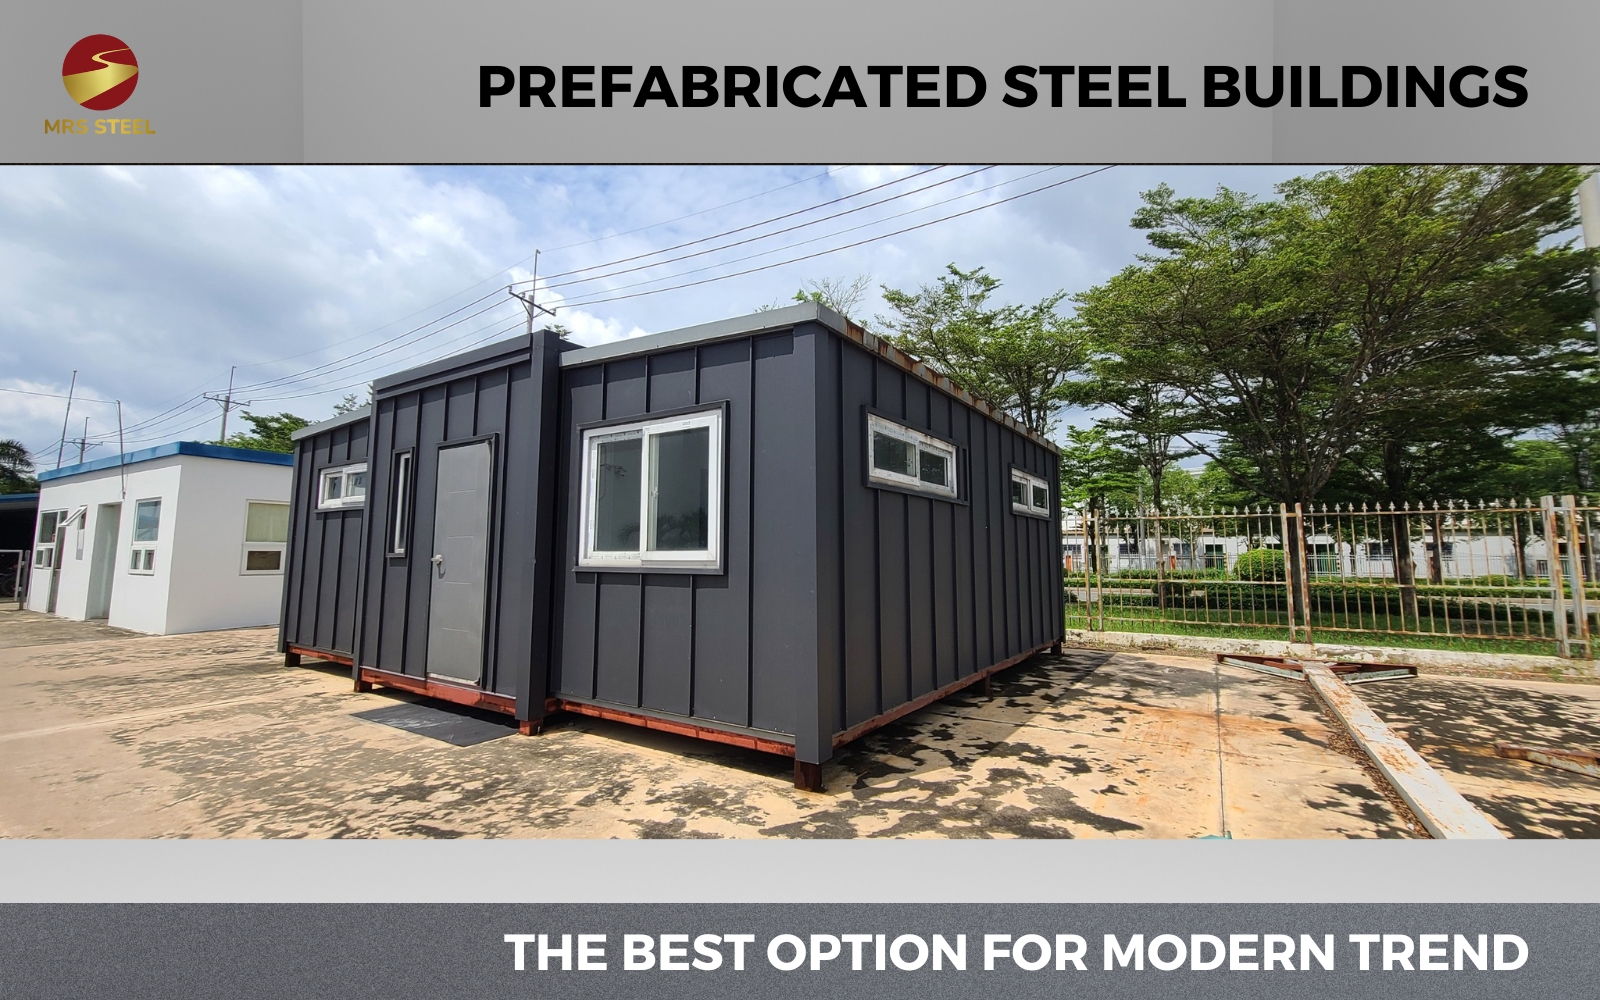 Reason why prefabricated steel buildings are the best option for modern trend